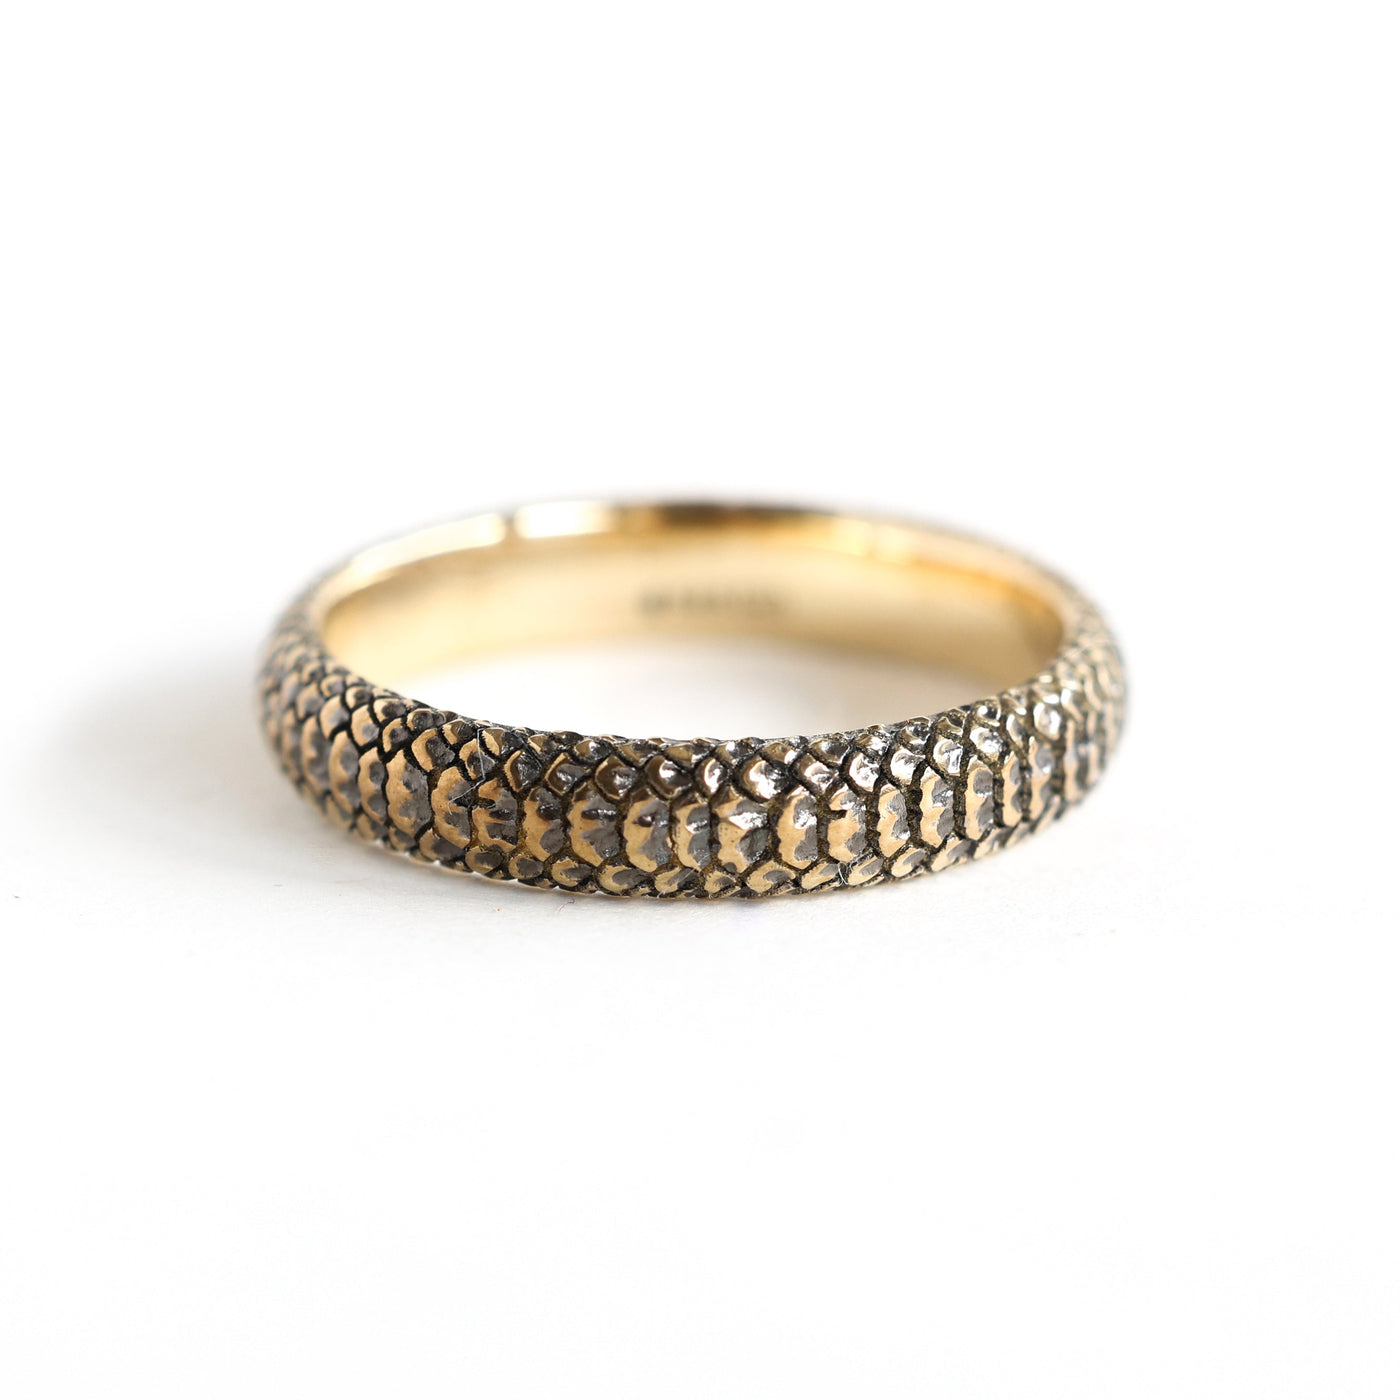 Gold snake band textured ring, close-up shot showcasing intricate snake skin pattern. Crafted in 14k & 18k gold, with customization options for gemstones.